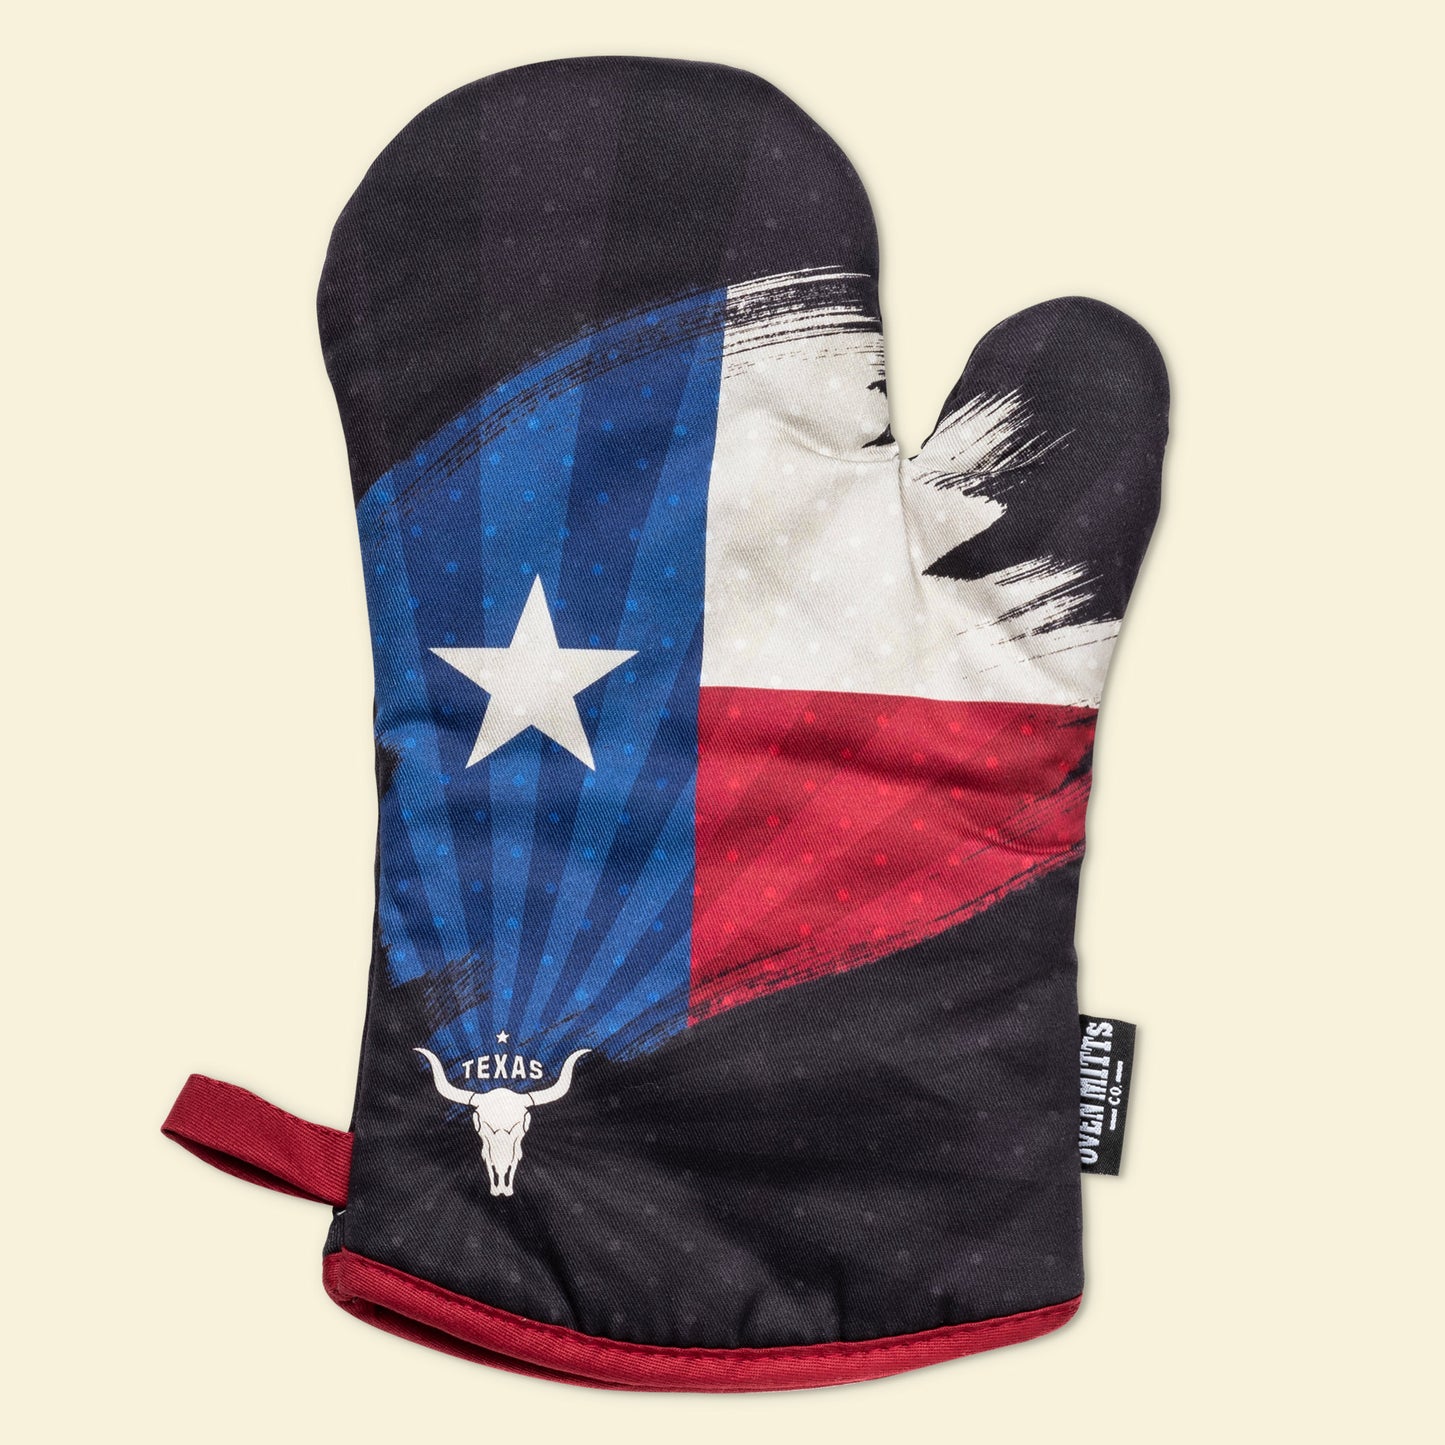 Texas Flag Oven Mitts gloves quality